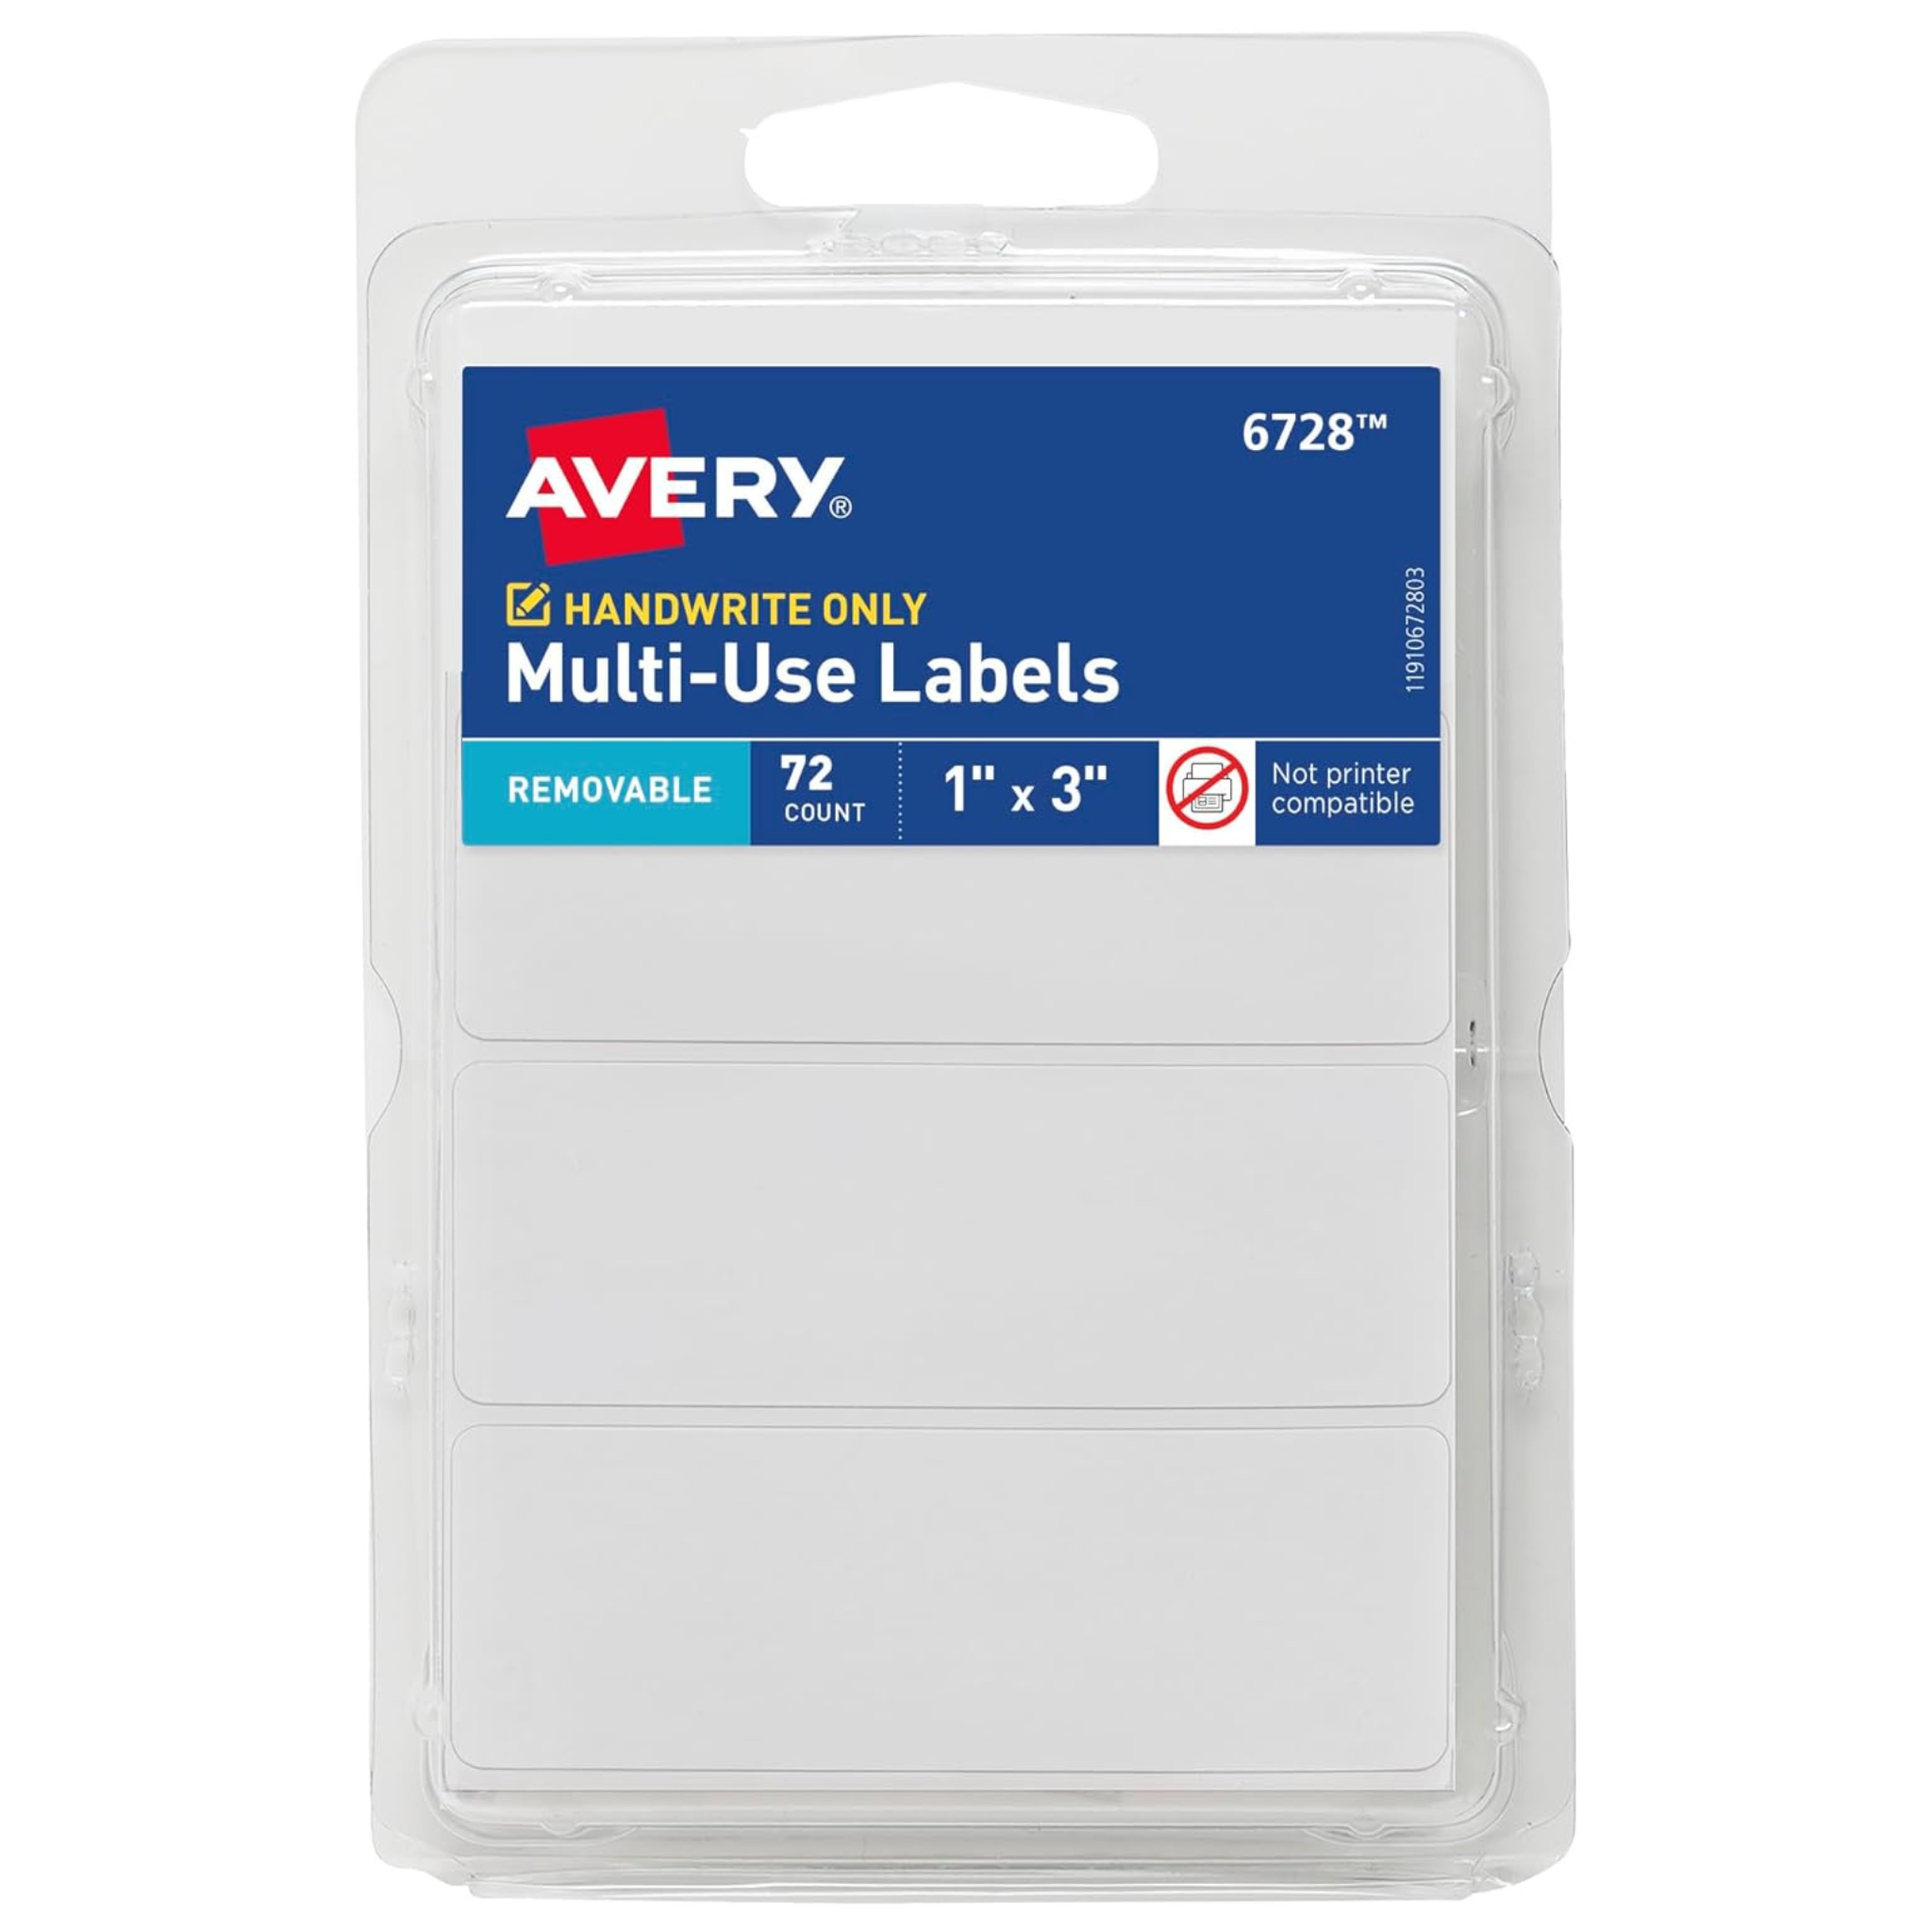 72-Count Avery Multi-Use Non-Printable Removable Labels (1" x 3", White)